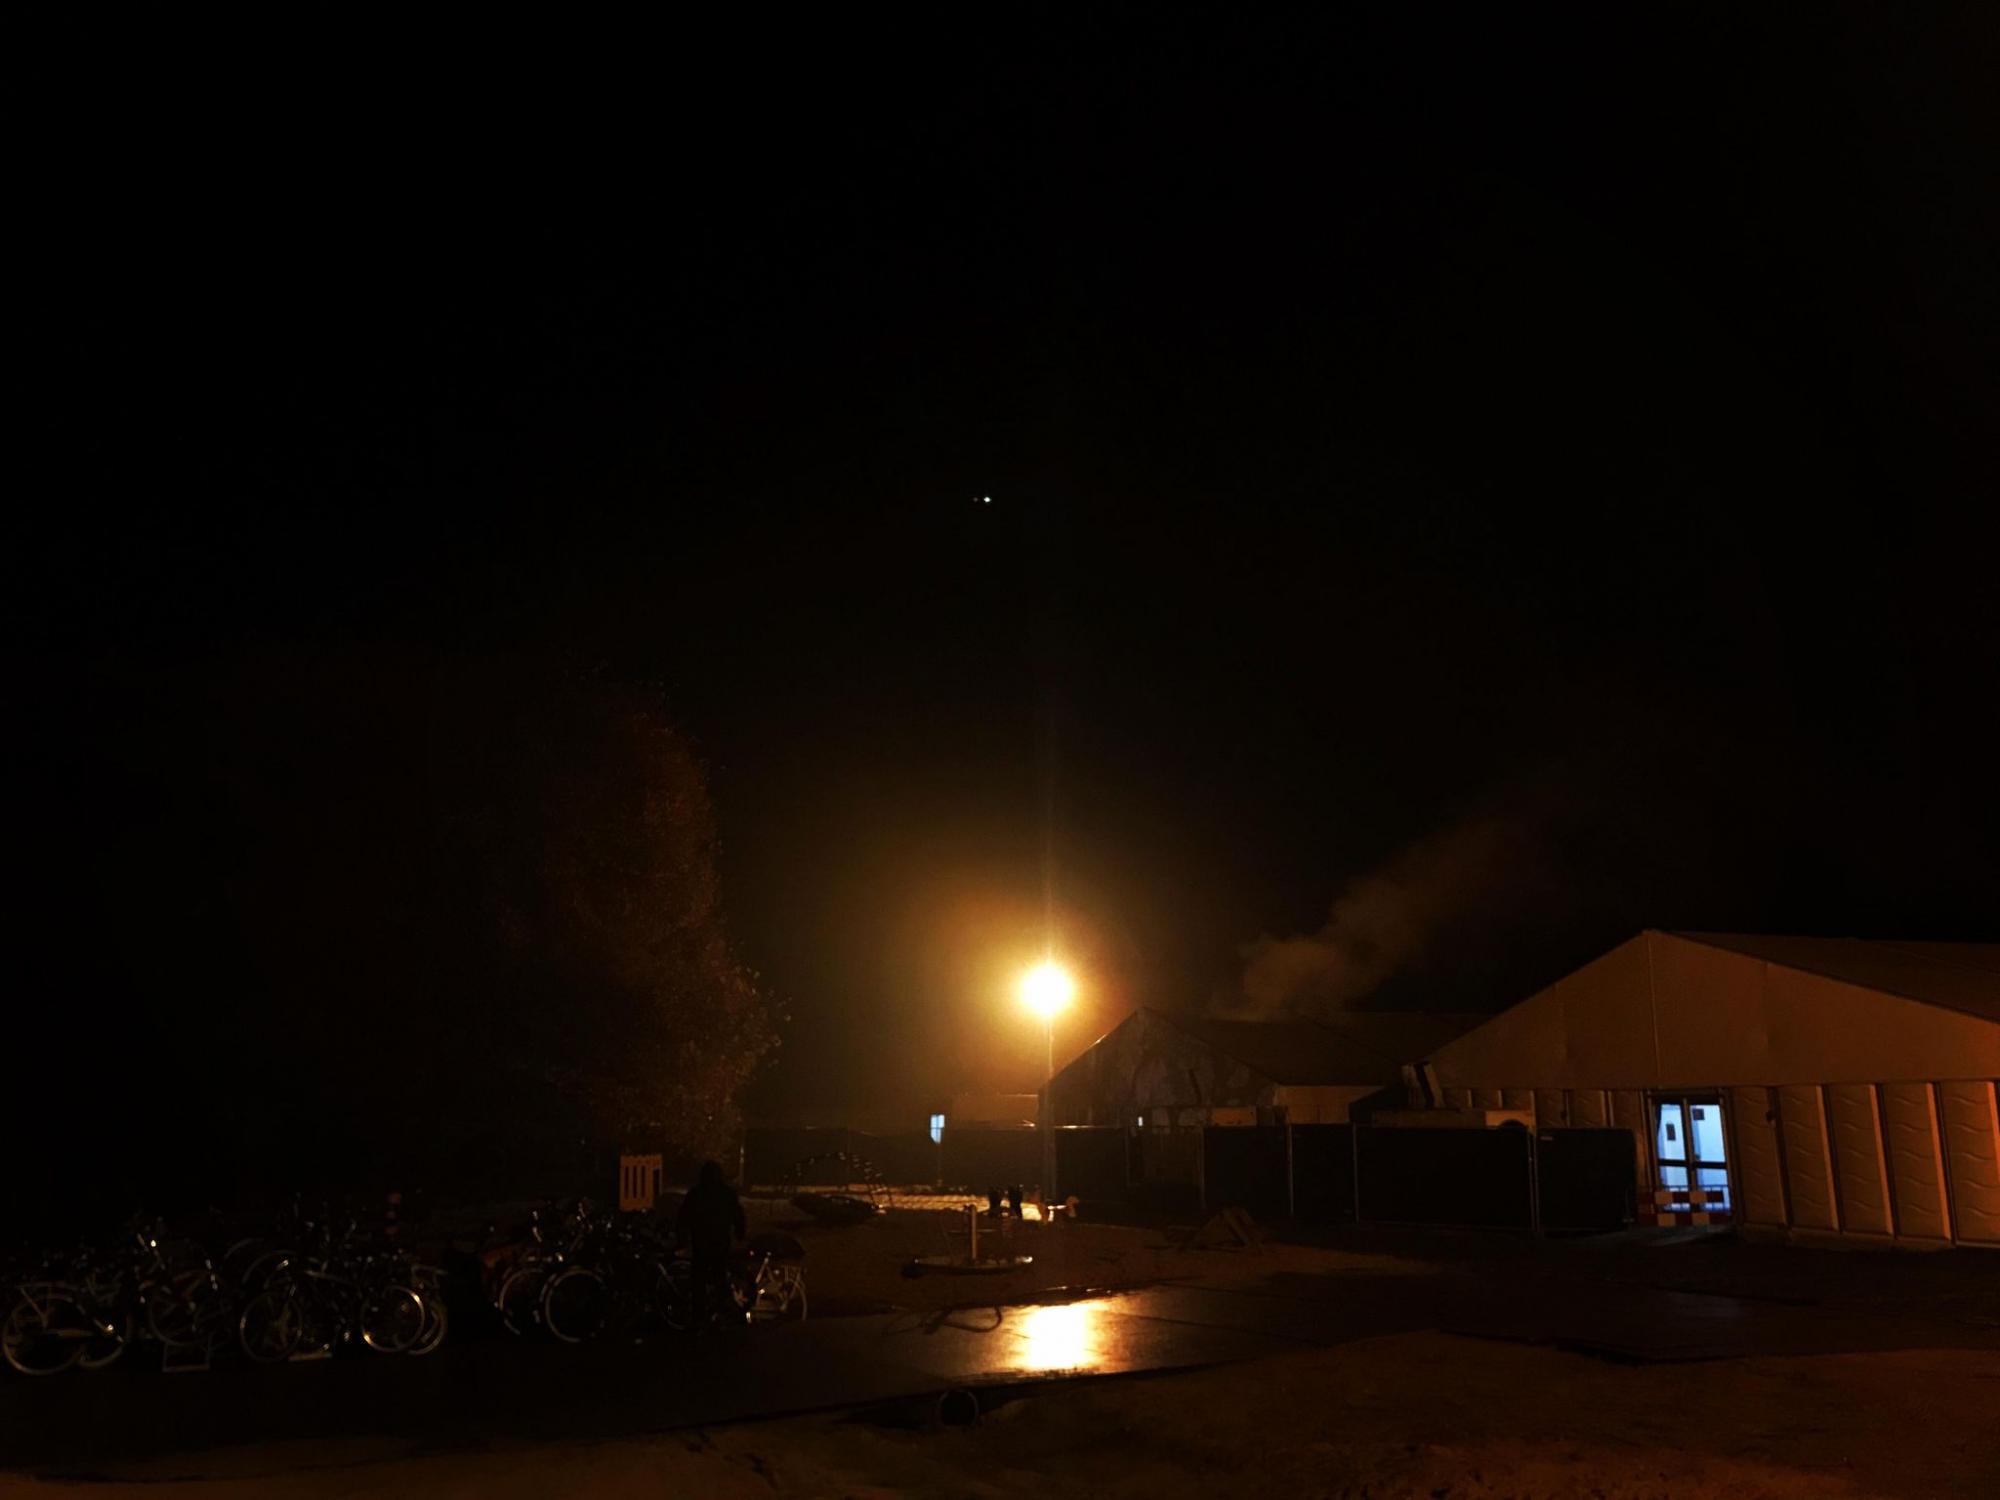 Nights in a temporary refugee camp in the Netherlands in September 2021. Picture: Atiq Rahimi